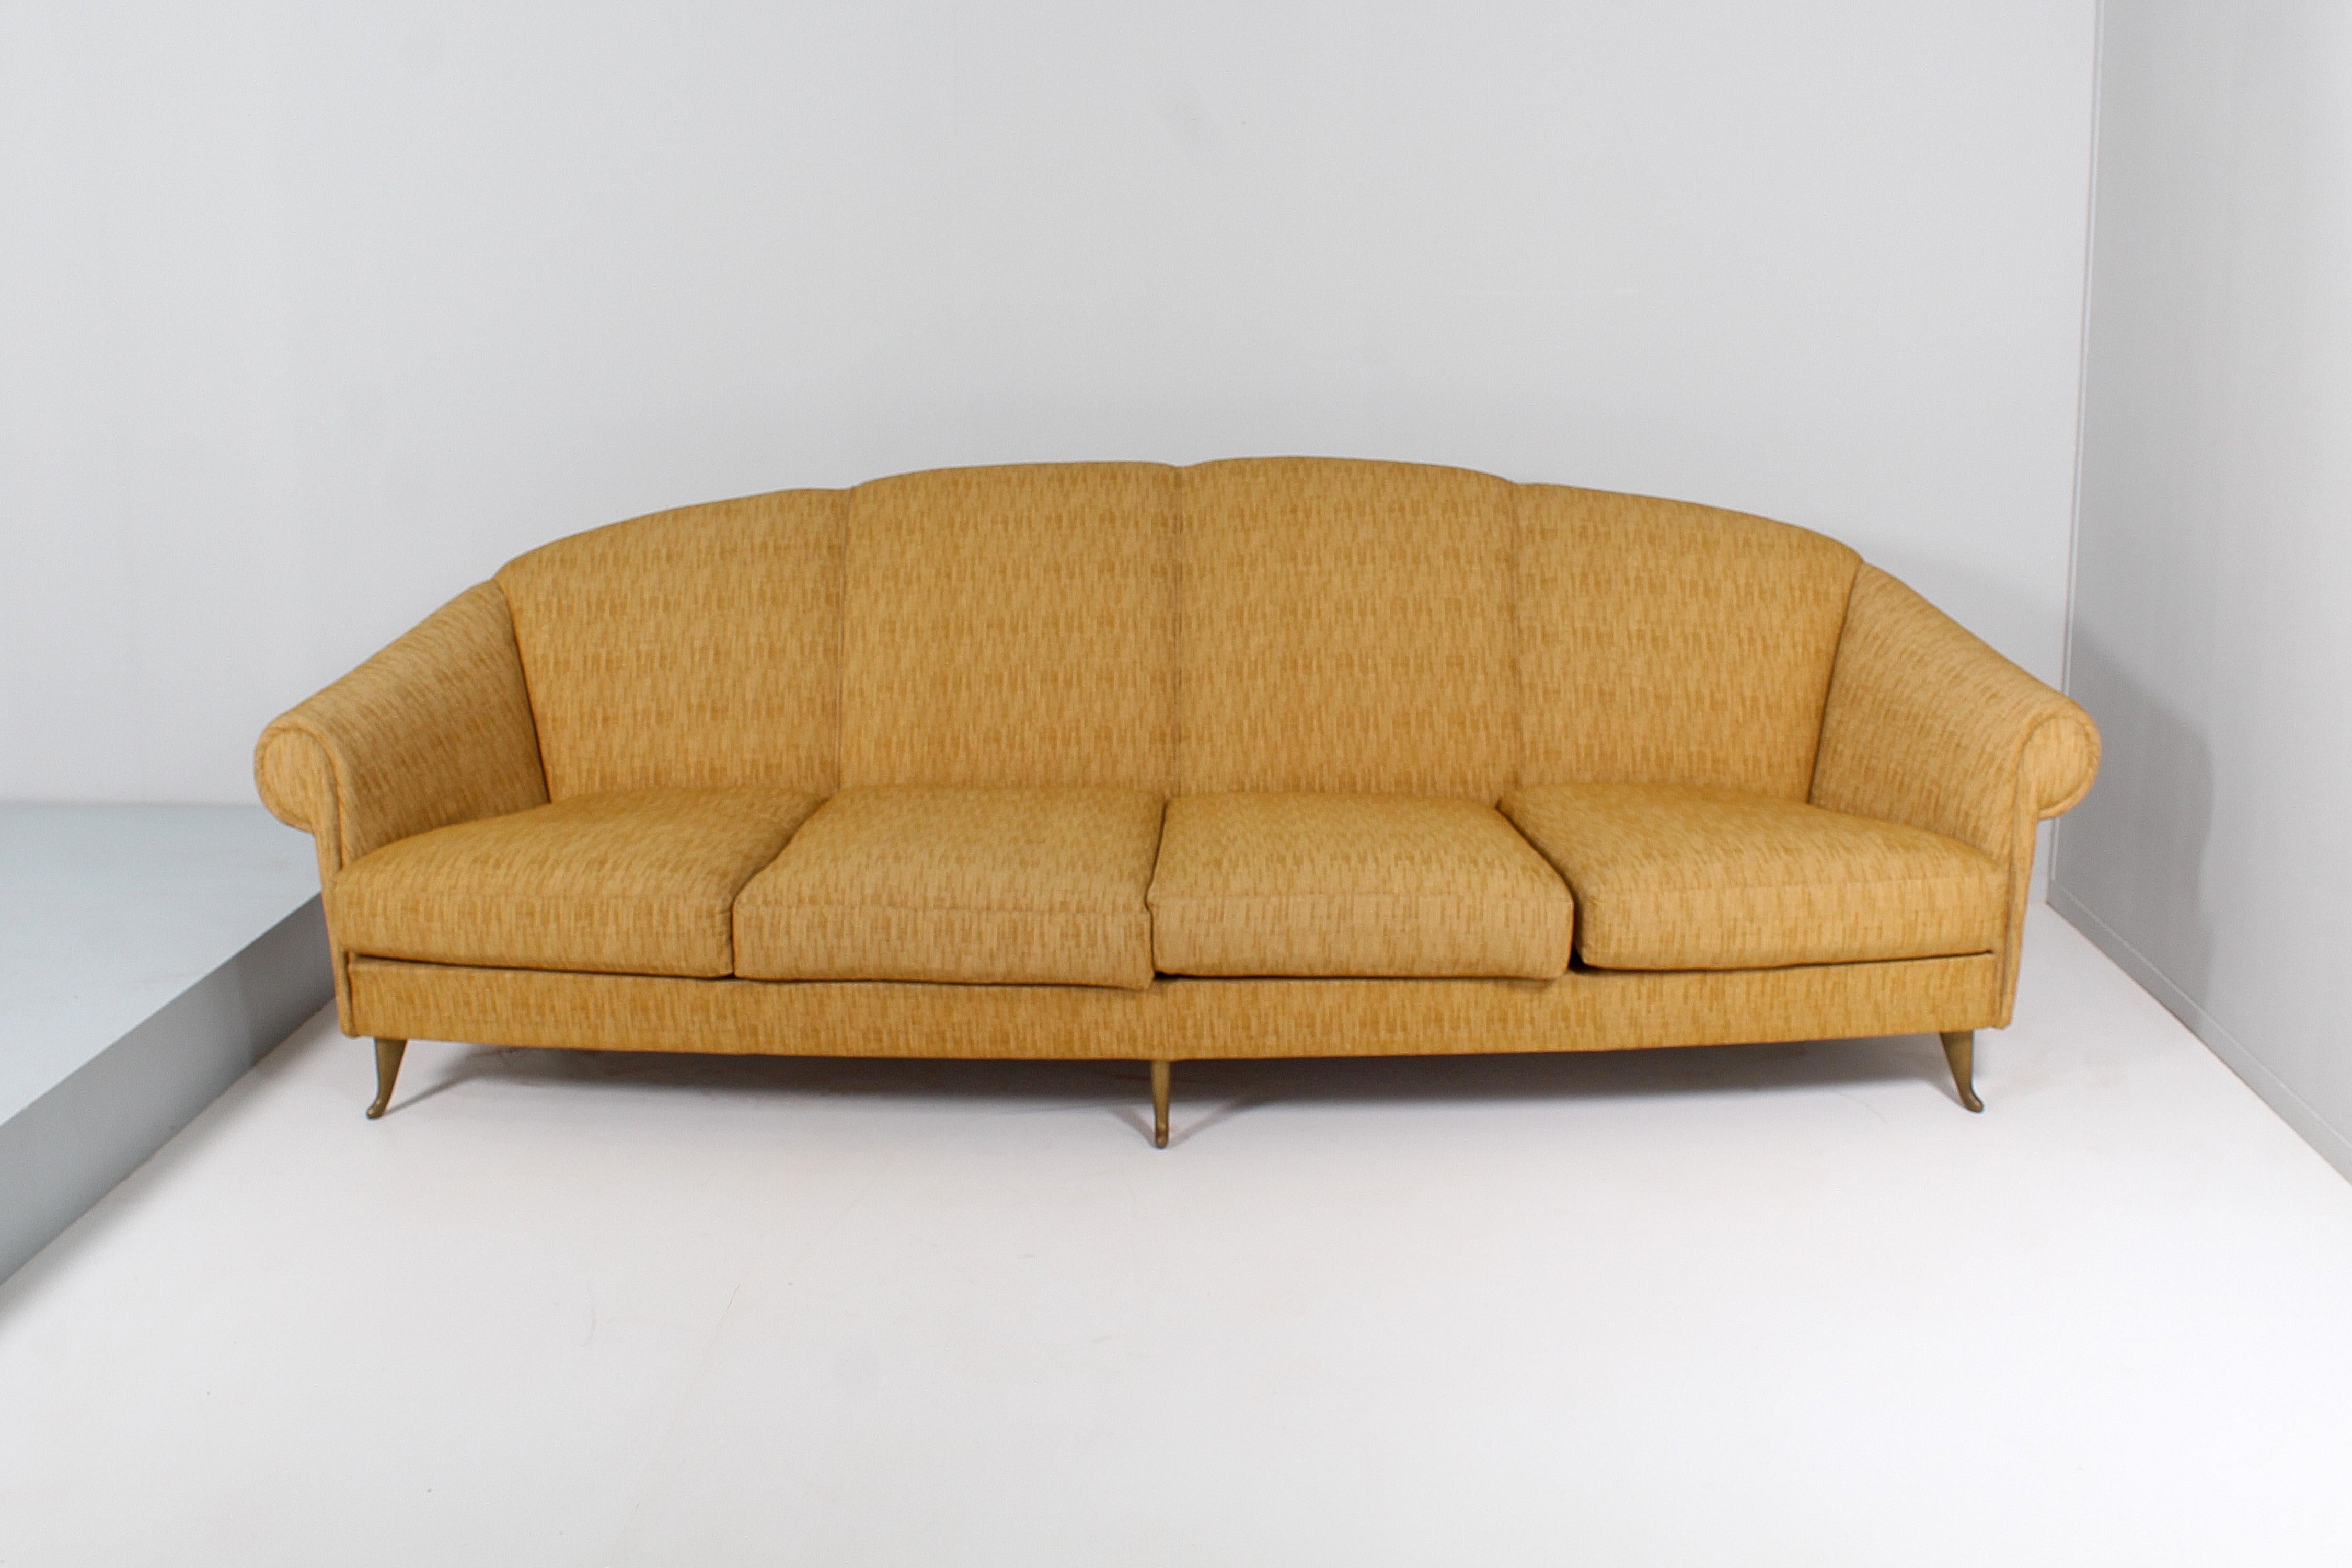 Imposing and beautiful 4-seater sofa with wooden structure, brass feet and padding covered in mustard-colored original fabric, with seat with four cushions. Attributed to Giò Ponti, Italian manufacture by ISA Bergamo from the 60s. Maker's label